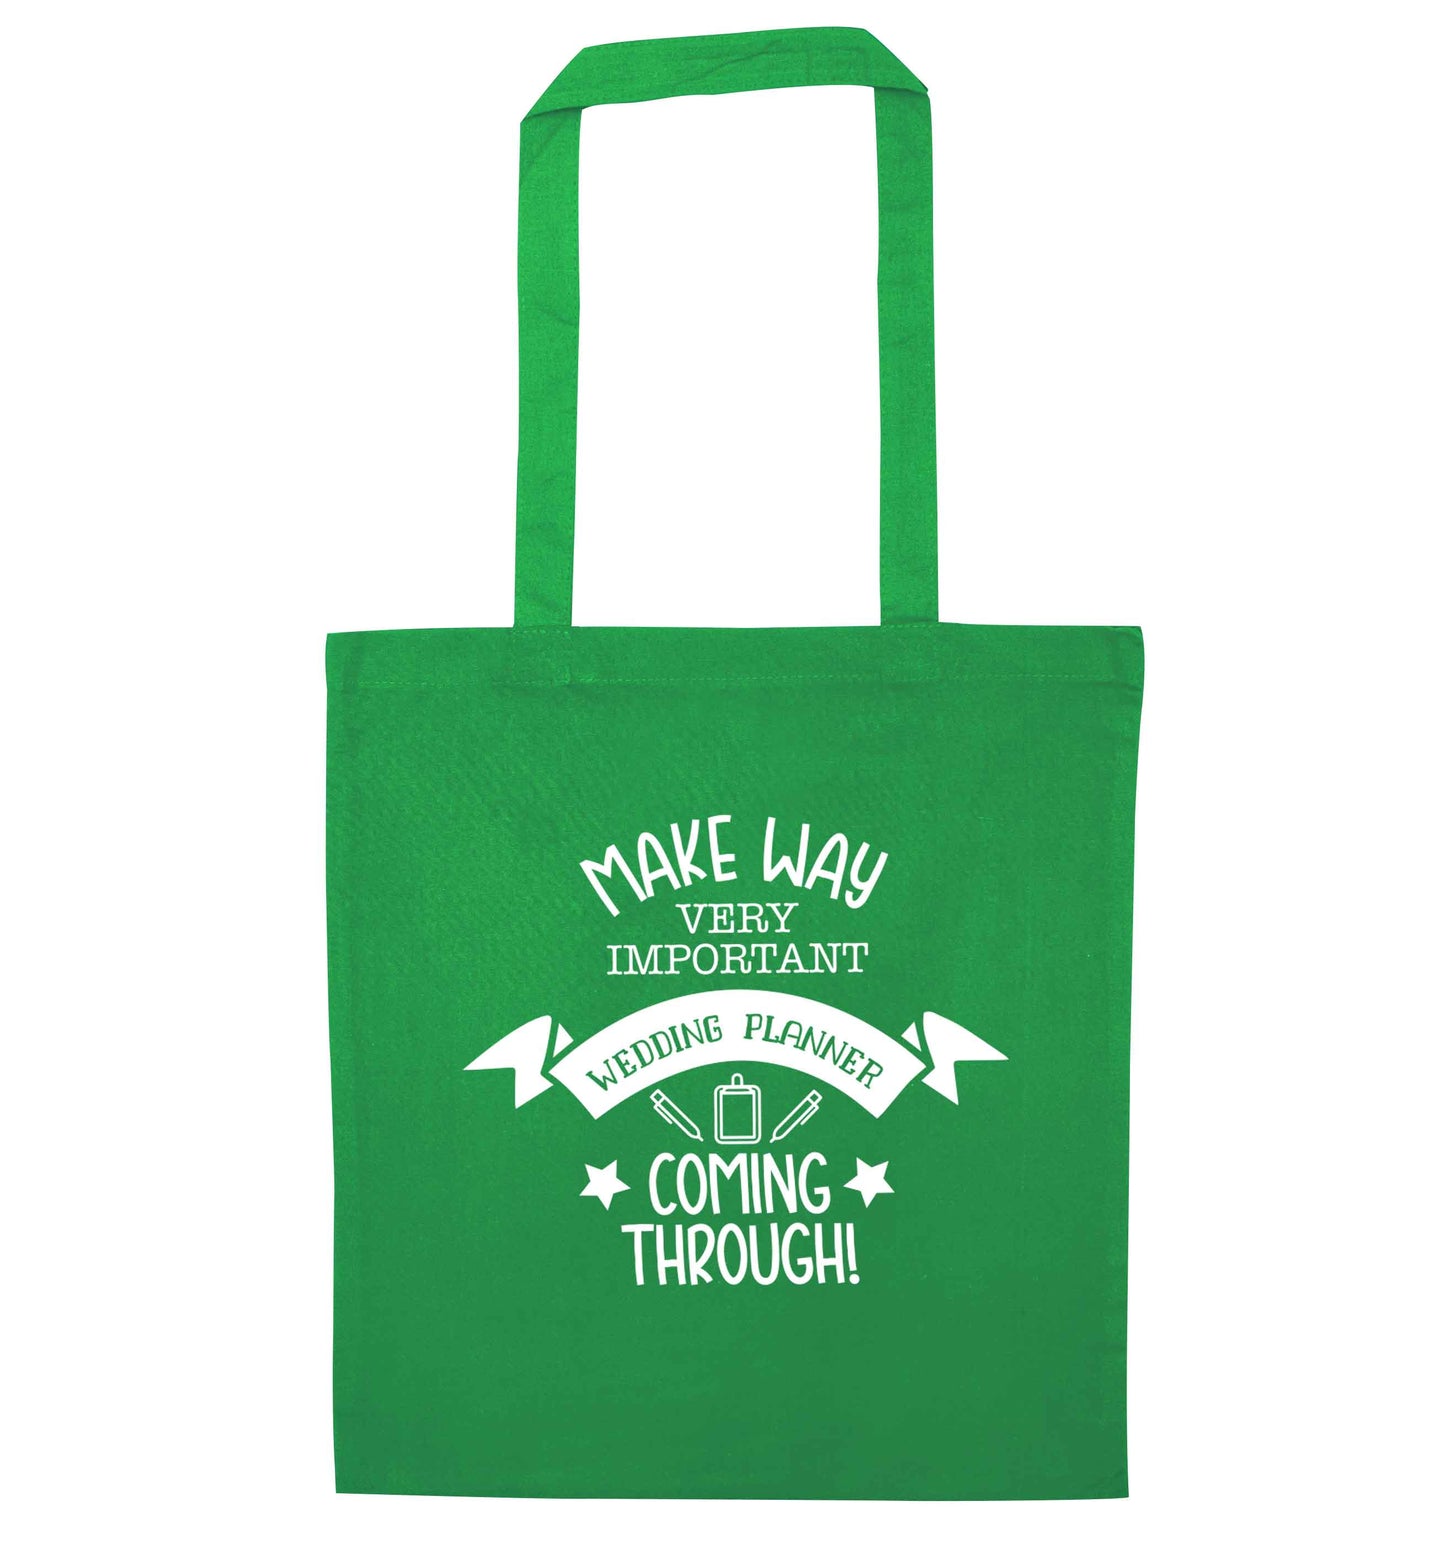 Make way very important wedding planner coming through green tote bag